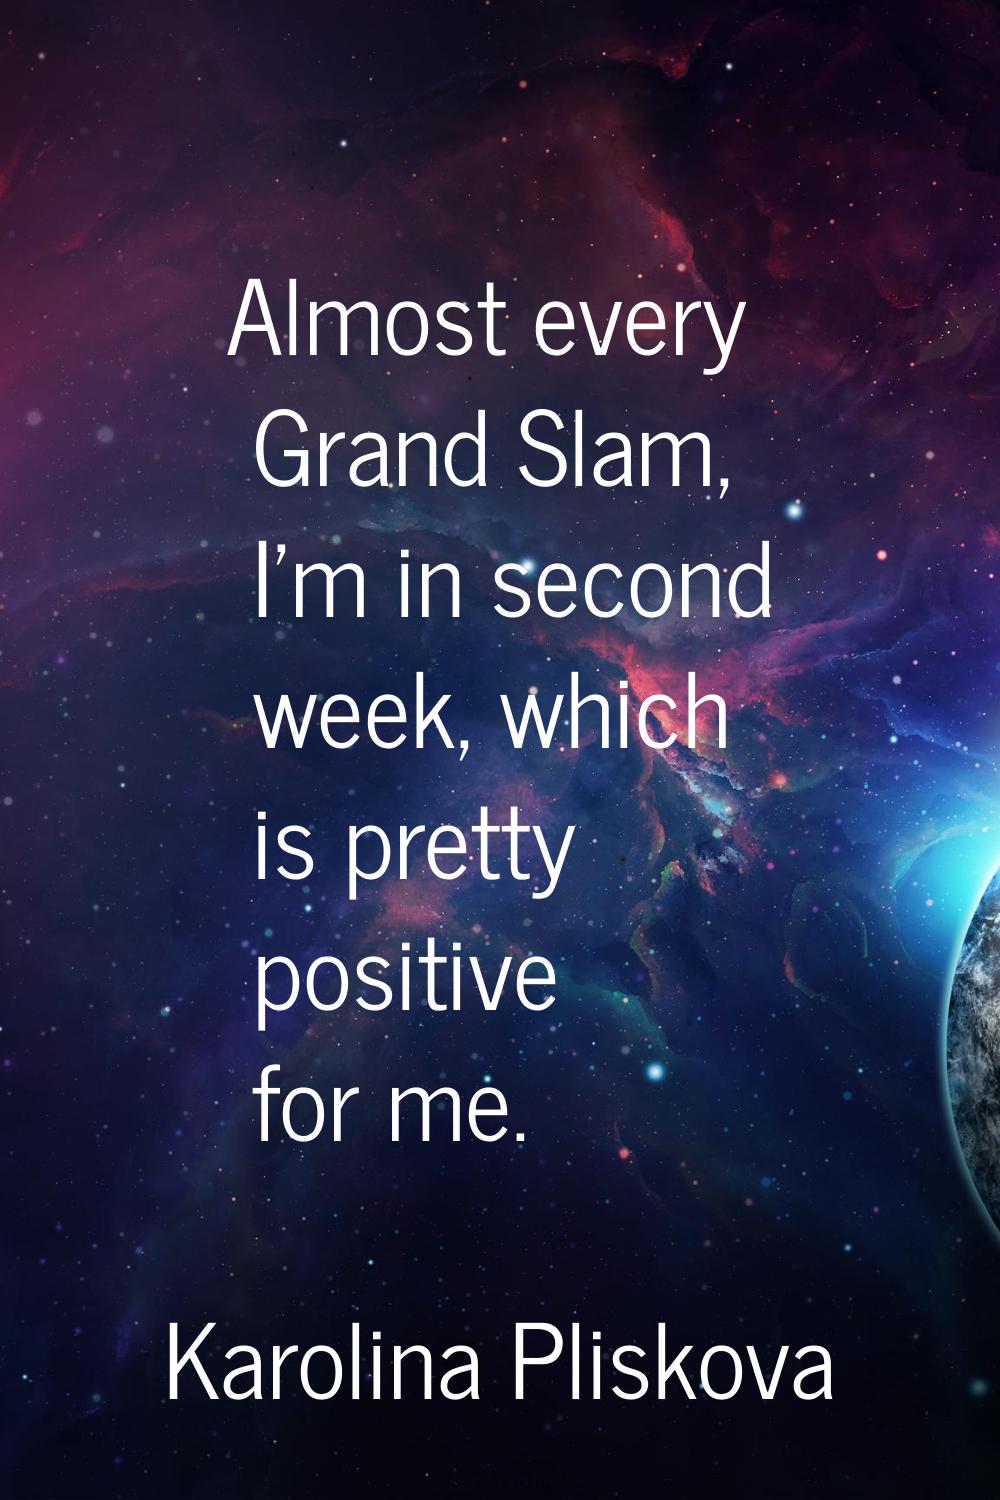 Almost every Grand Slam, I'm in second week, which is pretty positive for me.